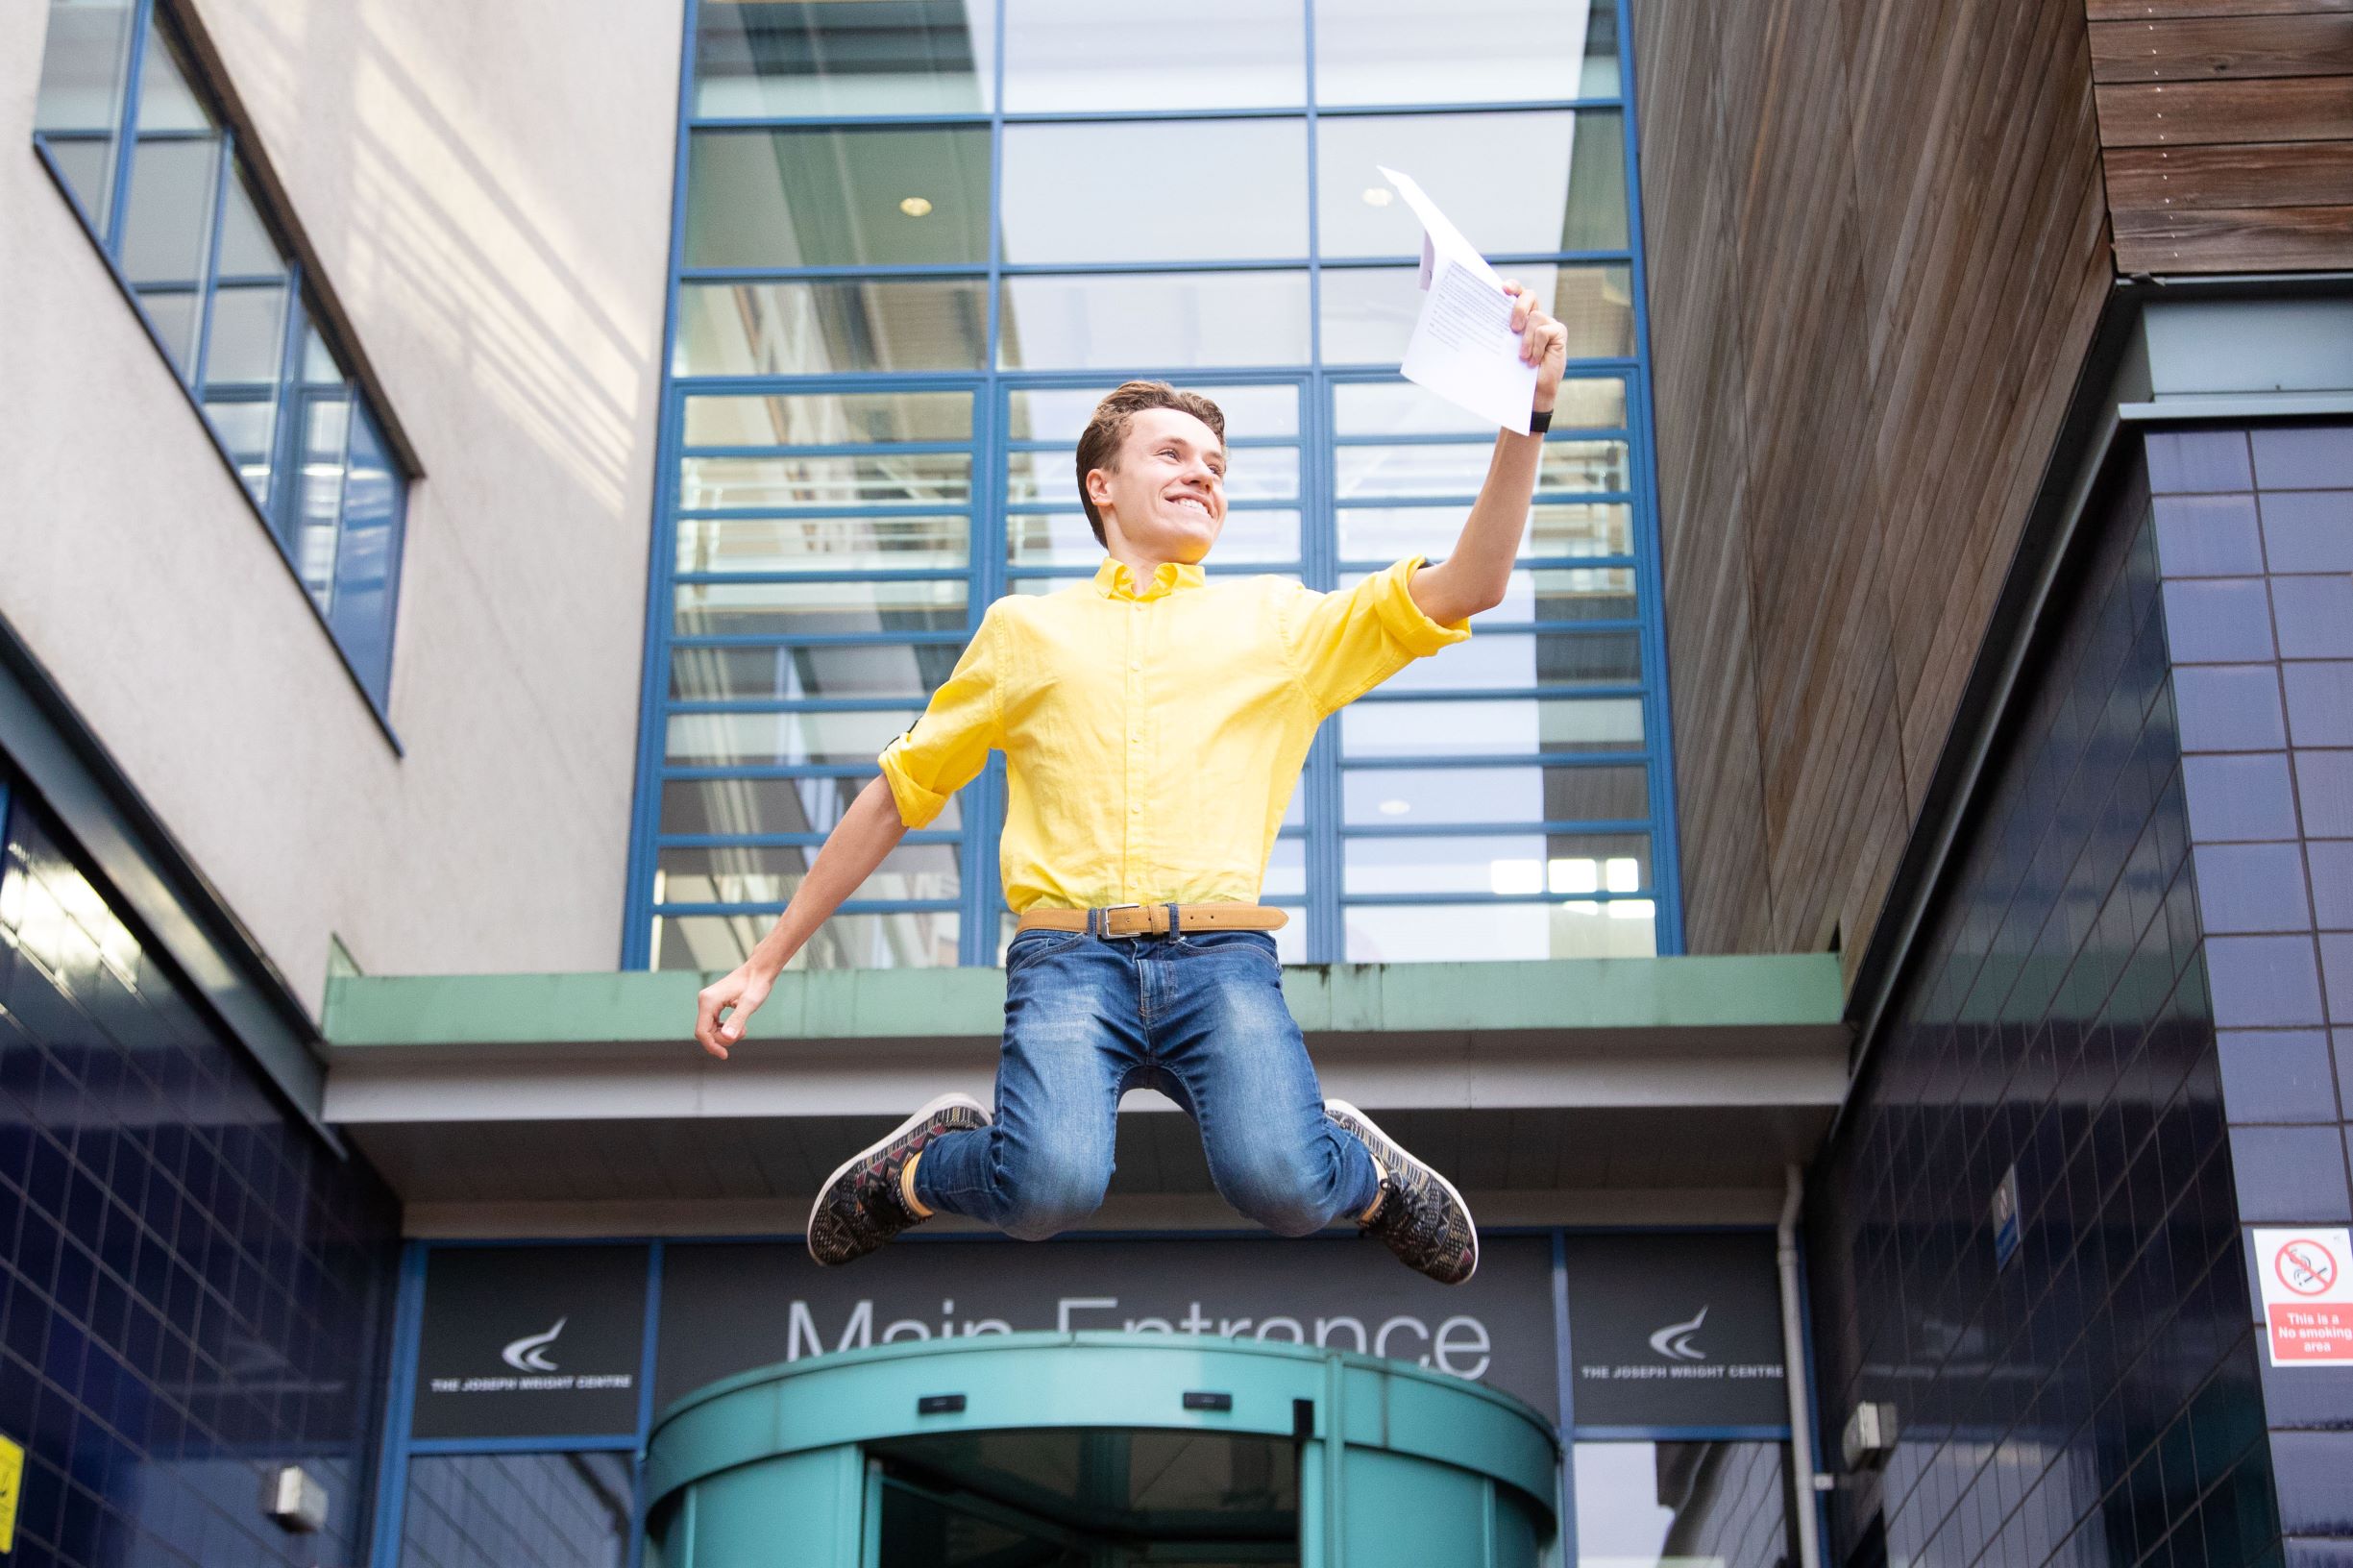 A-level student Ethan Lee jumps with joy at the Joseph Wright Centre